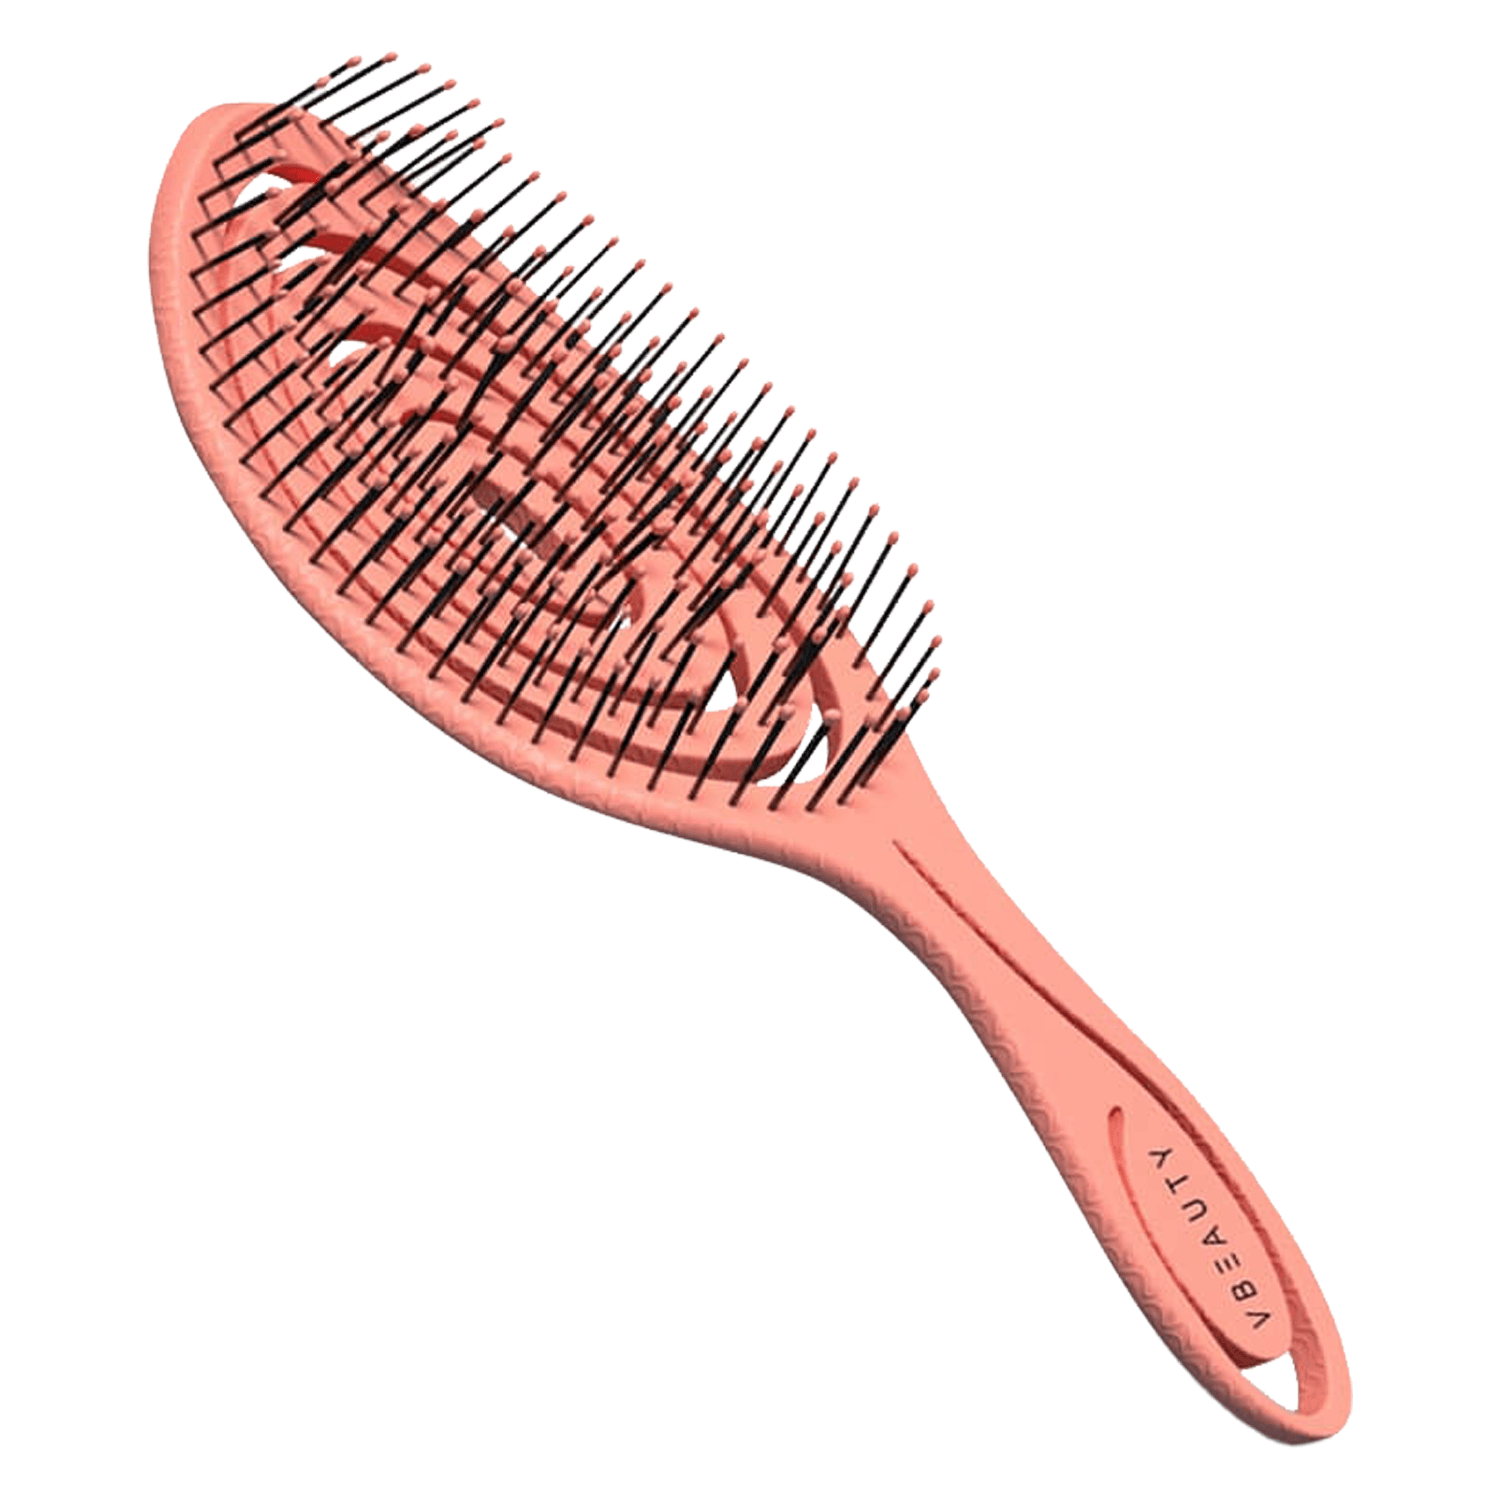 VBEAUTY Hair - Straw Brush Travel Size Coral